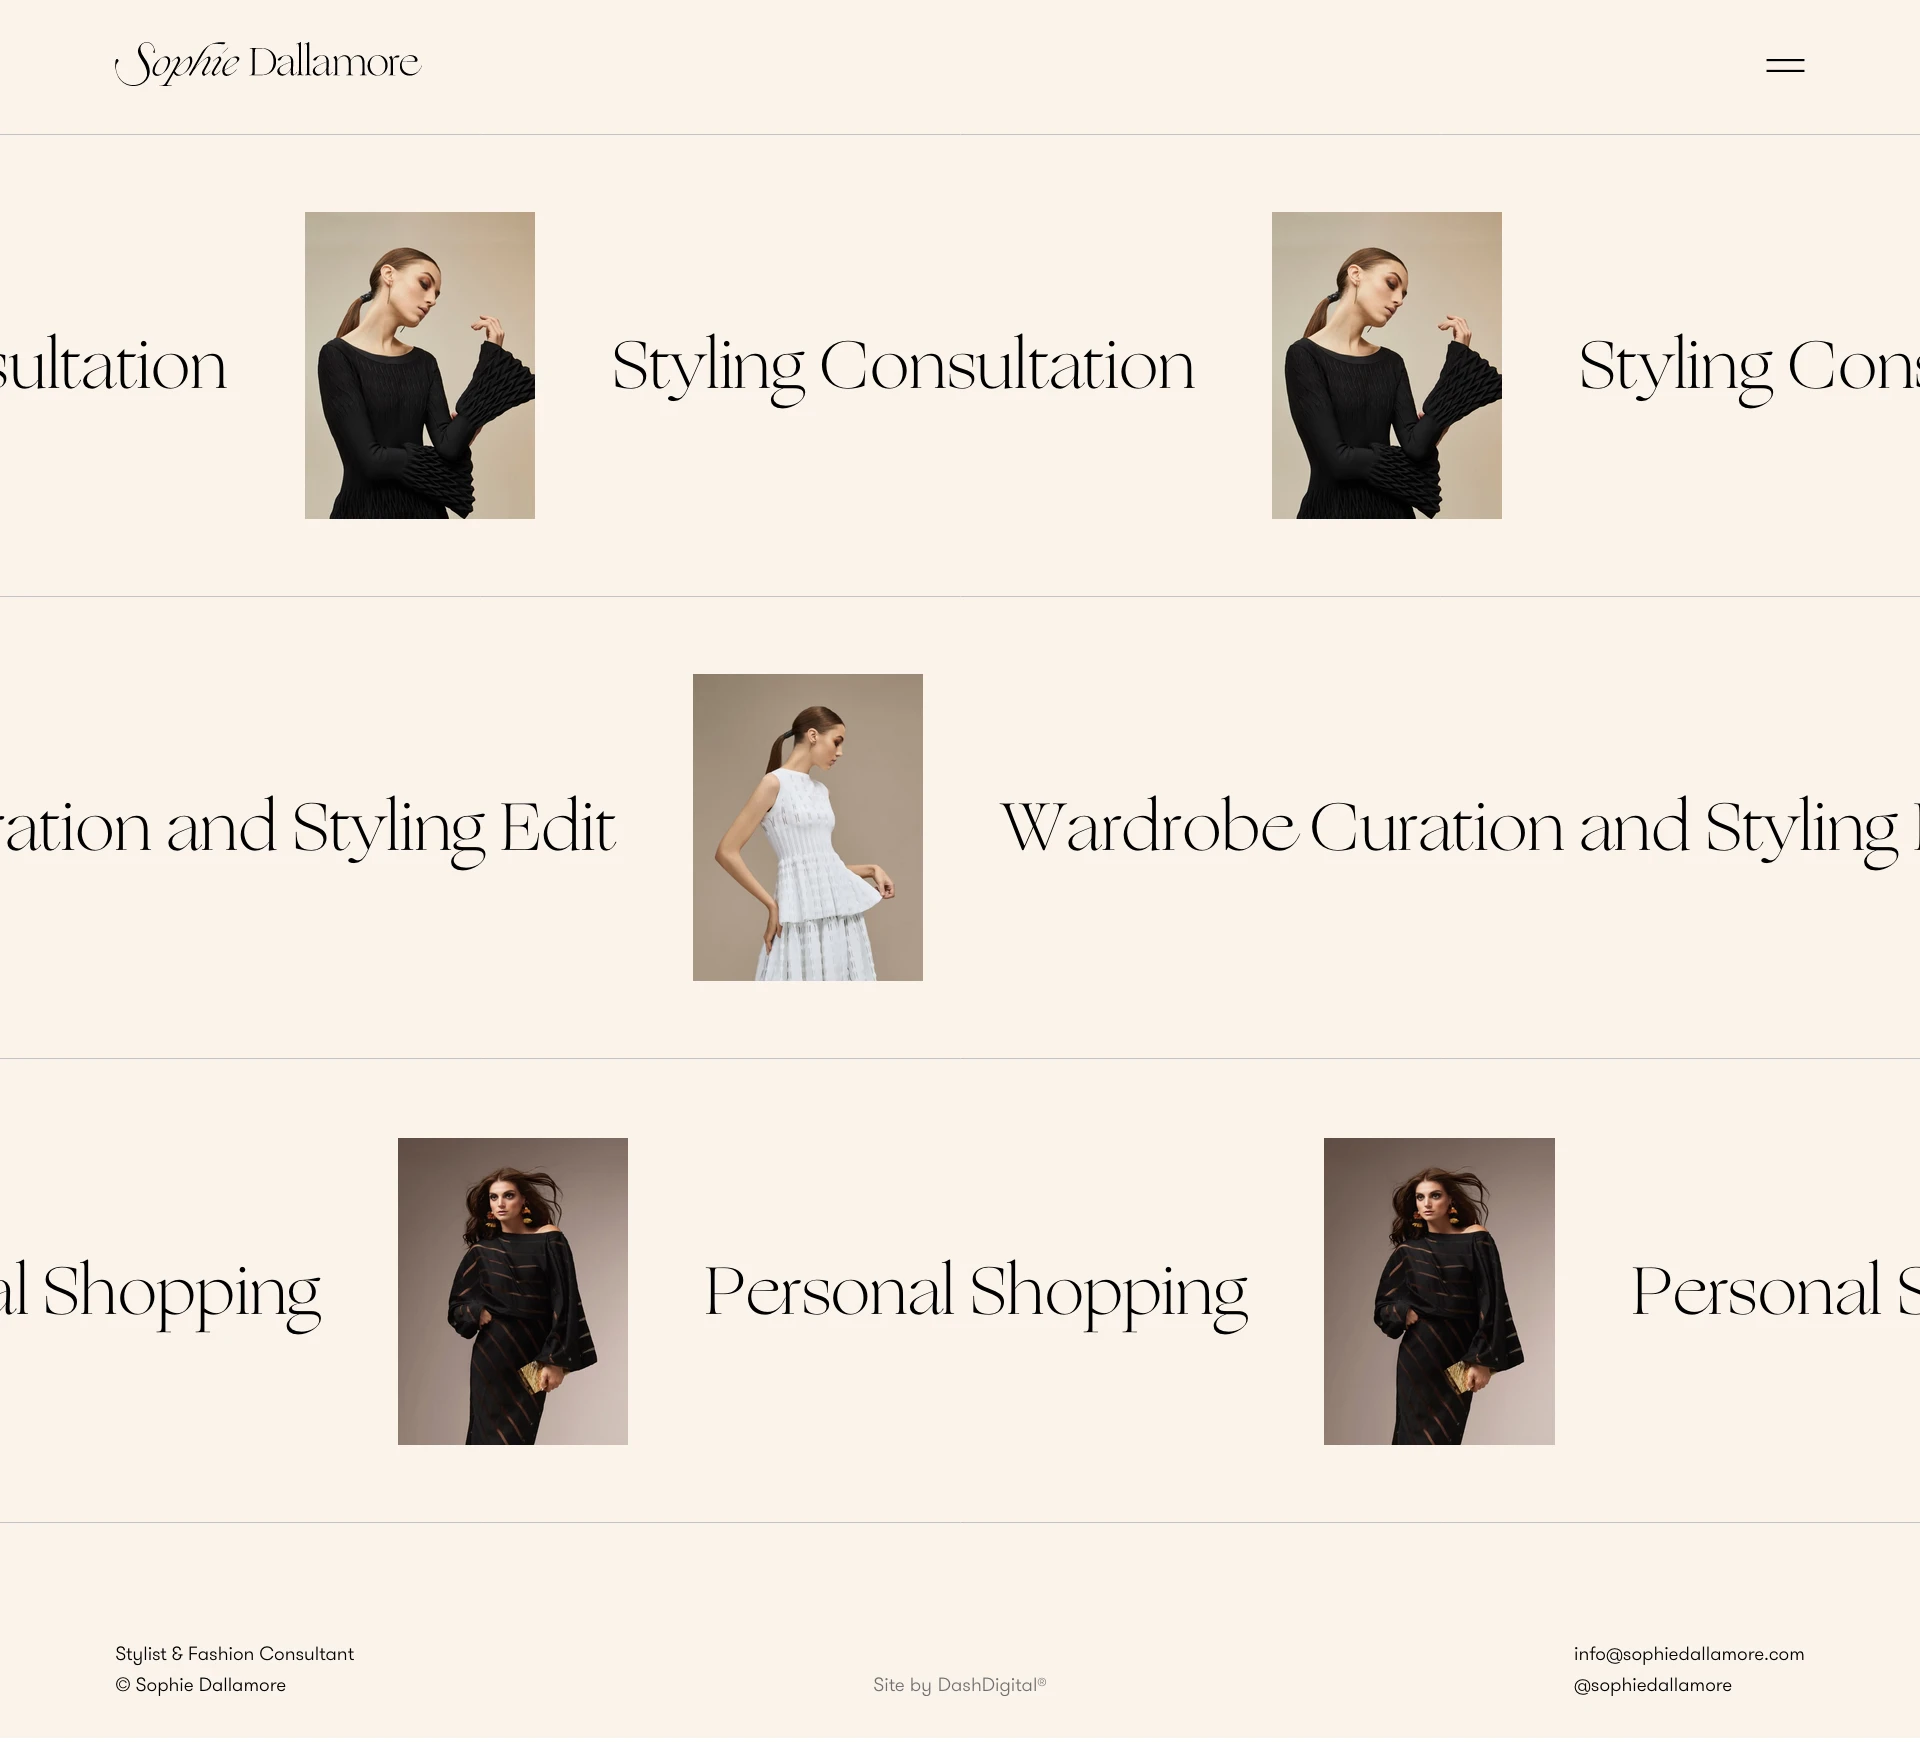 Sophie Dallamore Landing Page Example: London-based stylist & fashion consultant. Styling advice, wardrobe solutions, event dressing, shopping and gifting.